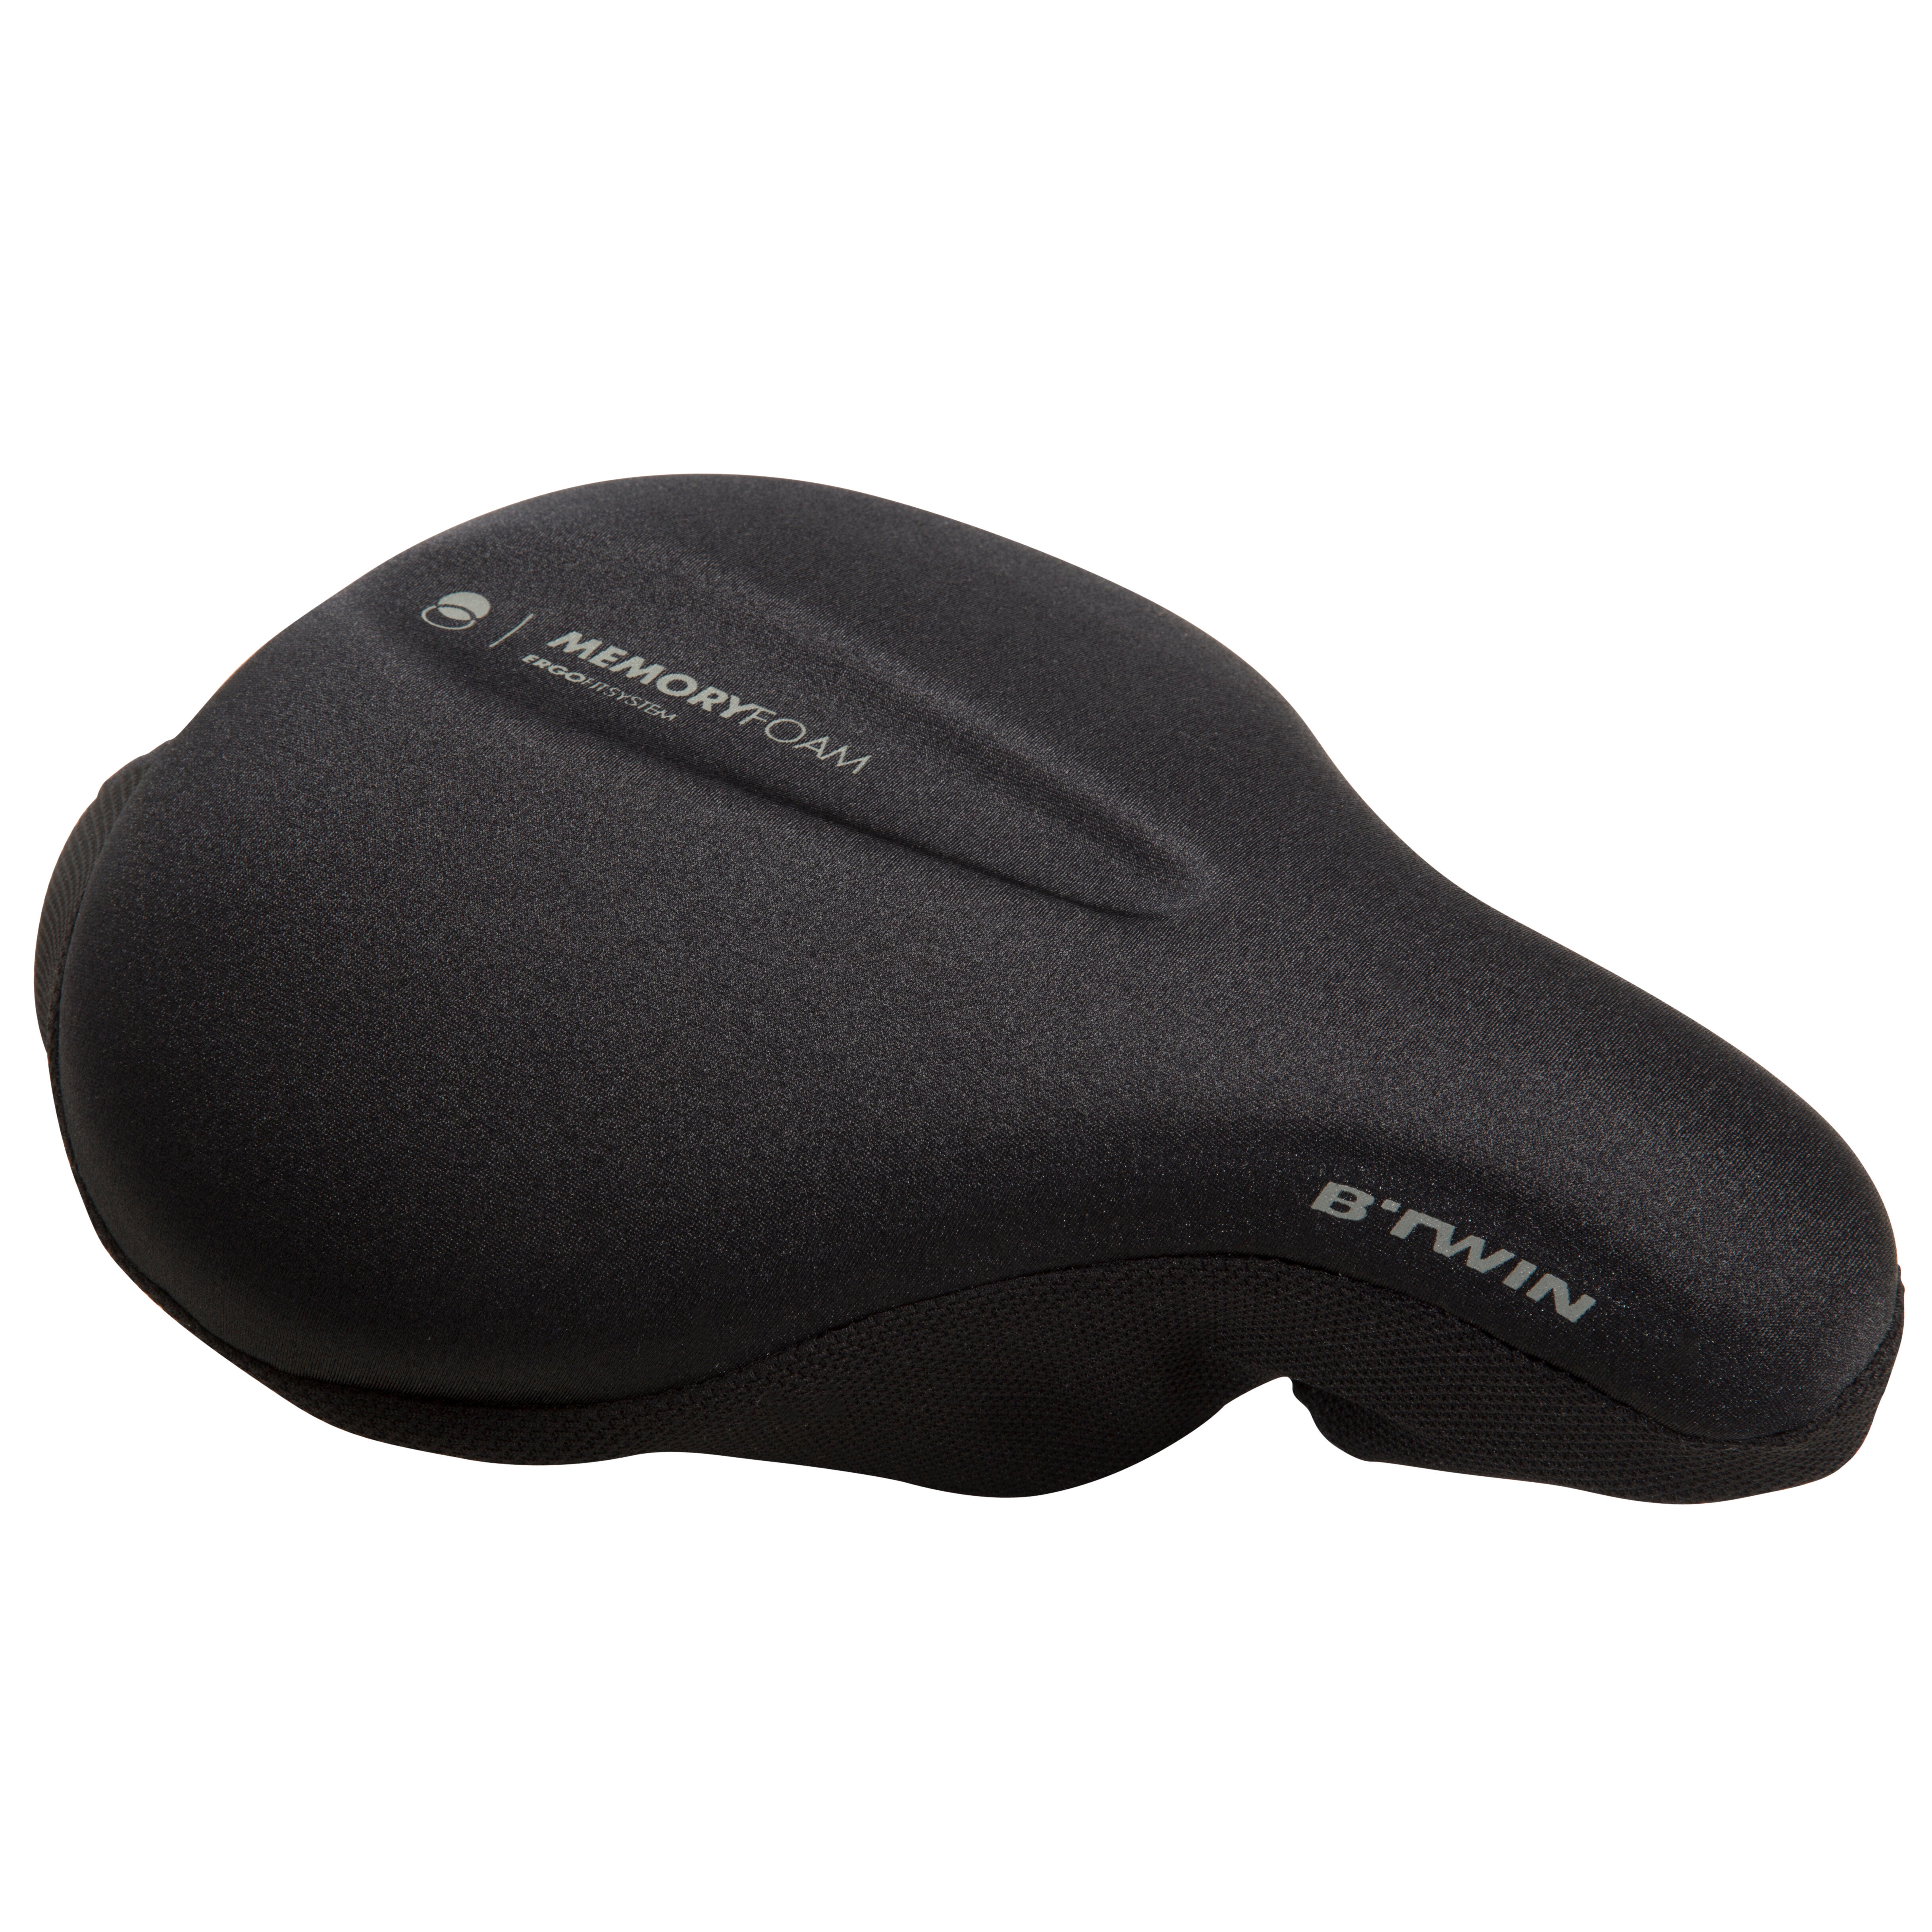 Cycle Seat | Buy Bicycle Seat Cover 